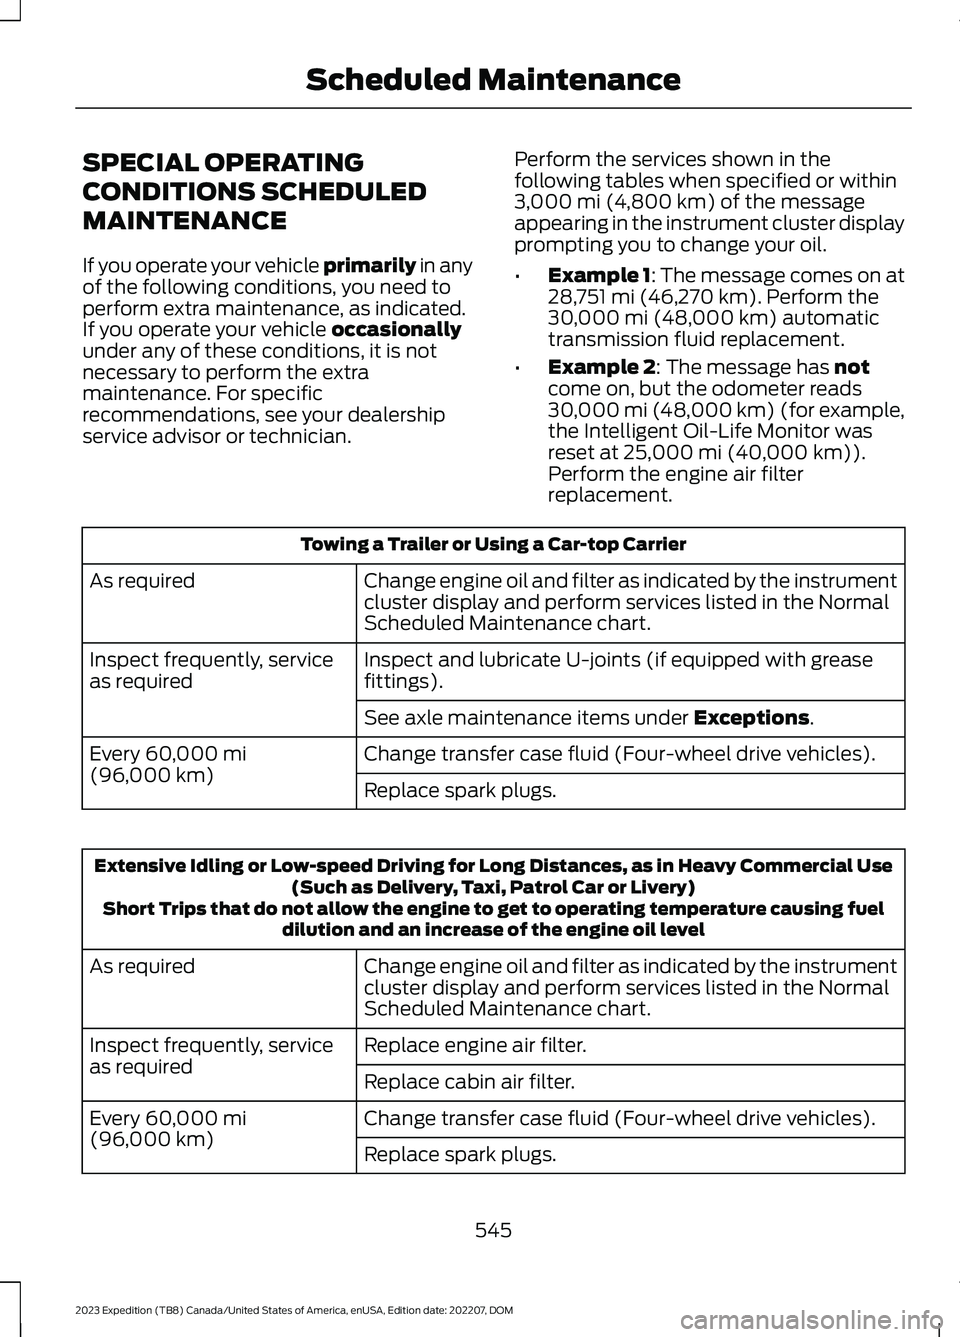 FORD EXPEDITION 2023  Owners Manual SPECIAL OPERATING
CONDITIONS SCHEDULED
MAINTENANCE
If you operate your vehicle primarily in anyof the following conditions, you need toperform extra maintenance, as indicated.If you operate your vehic